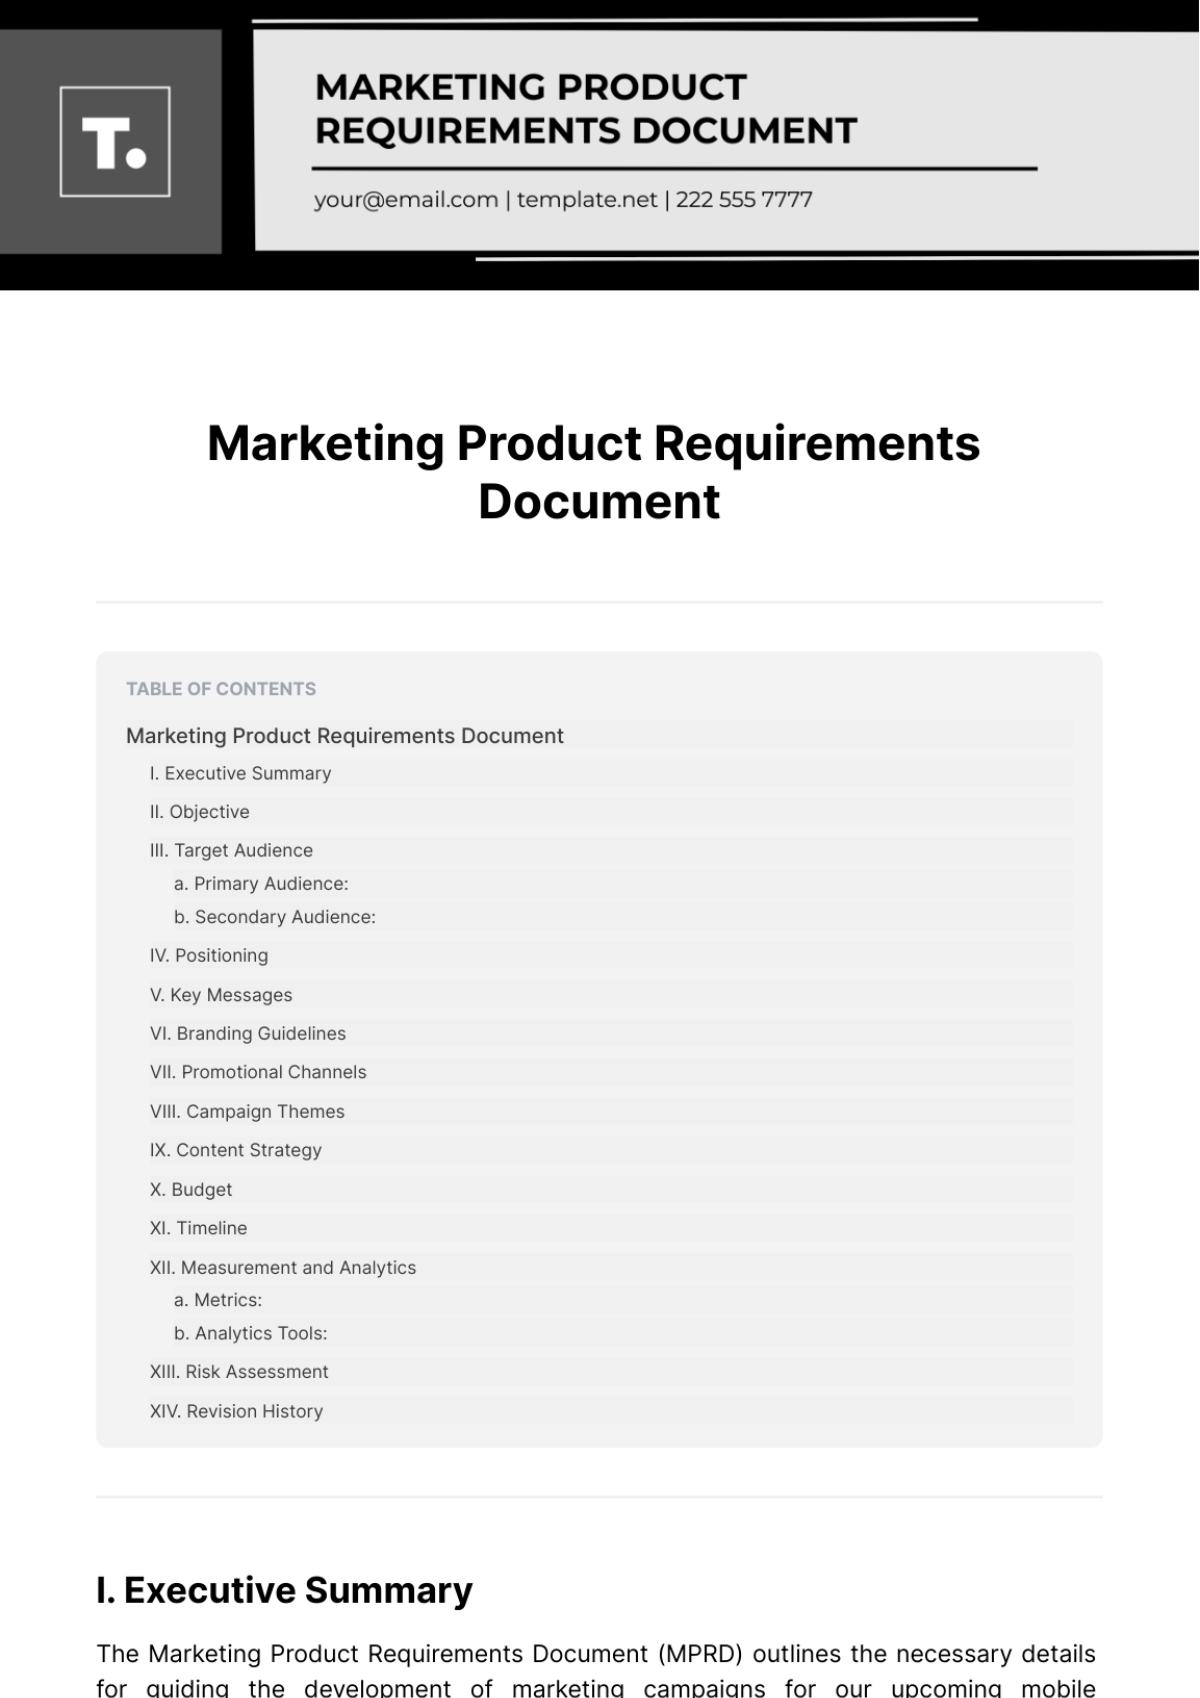 Free Marketing Product Requirements Document Template